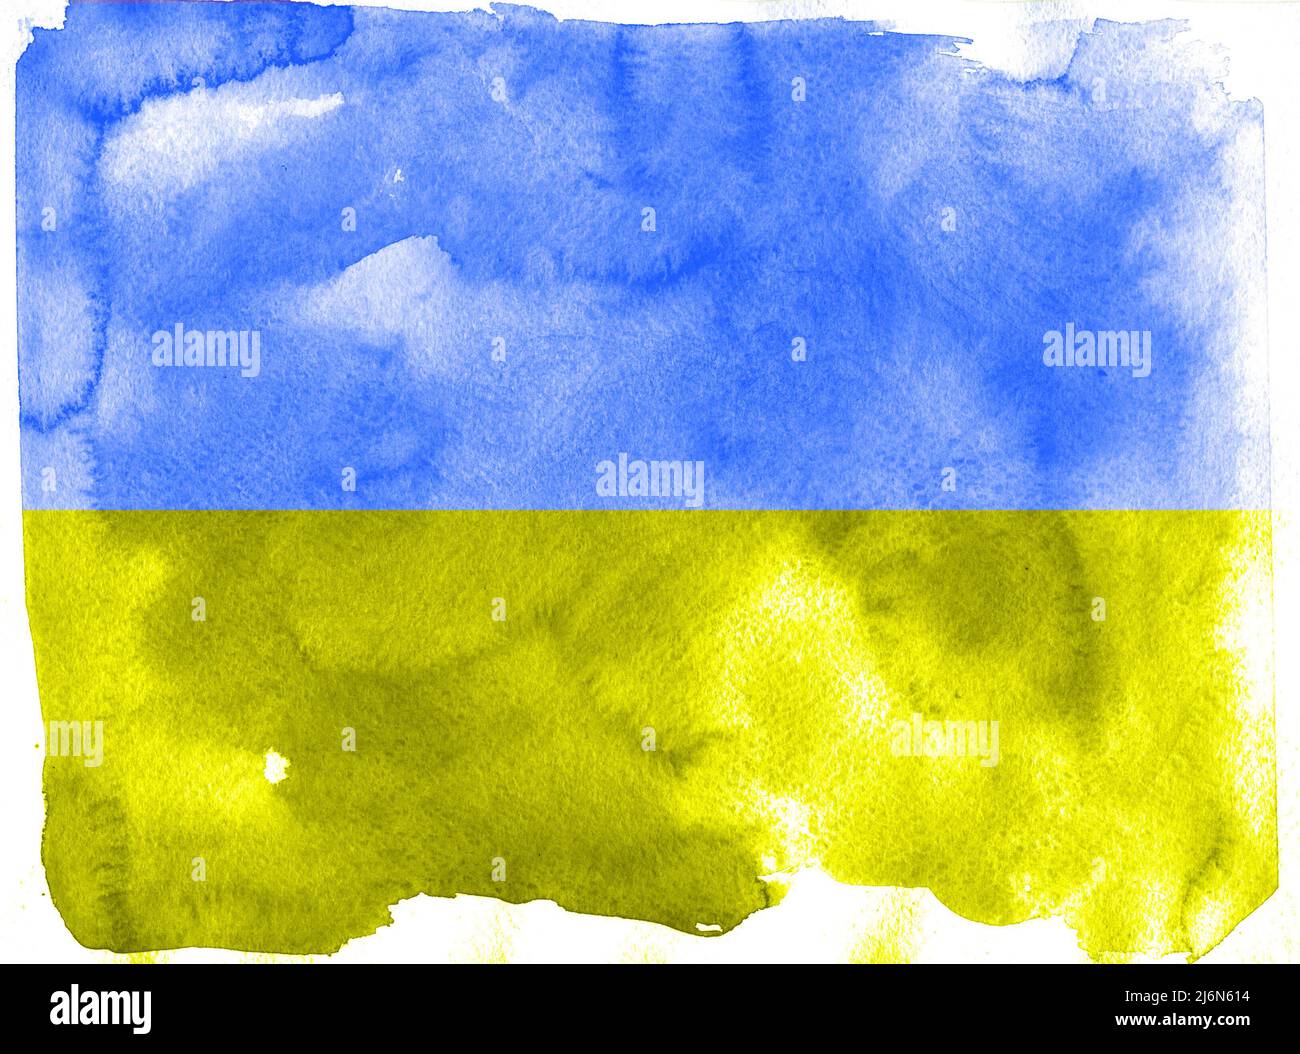 Blue and yellow Ukrainian flag watercolor pattern Stock Photo